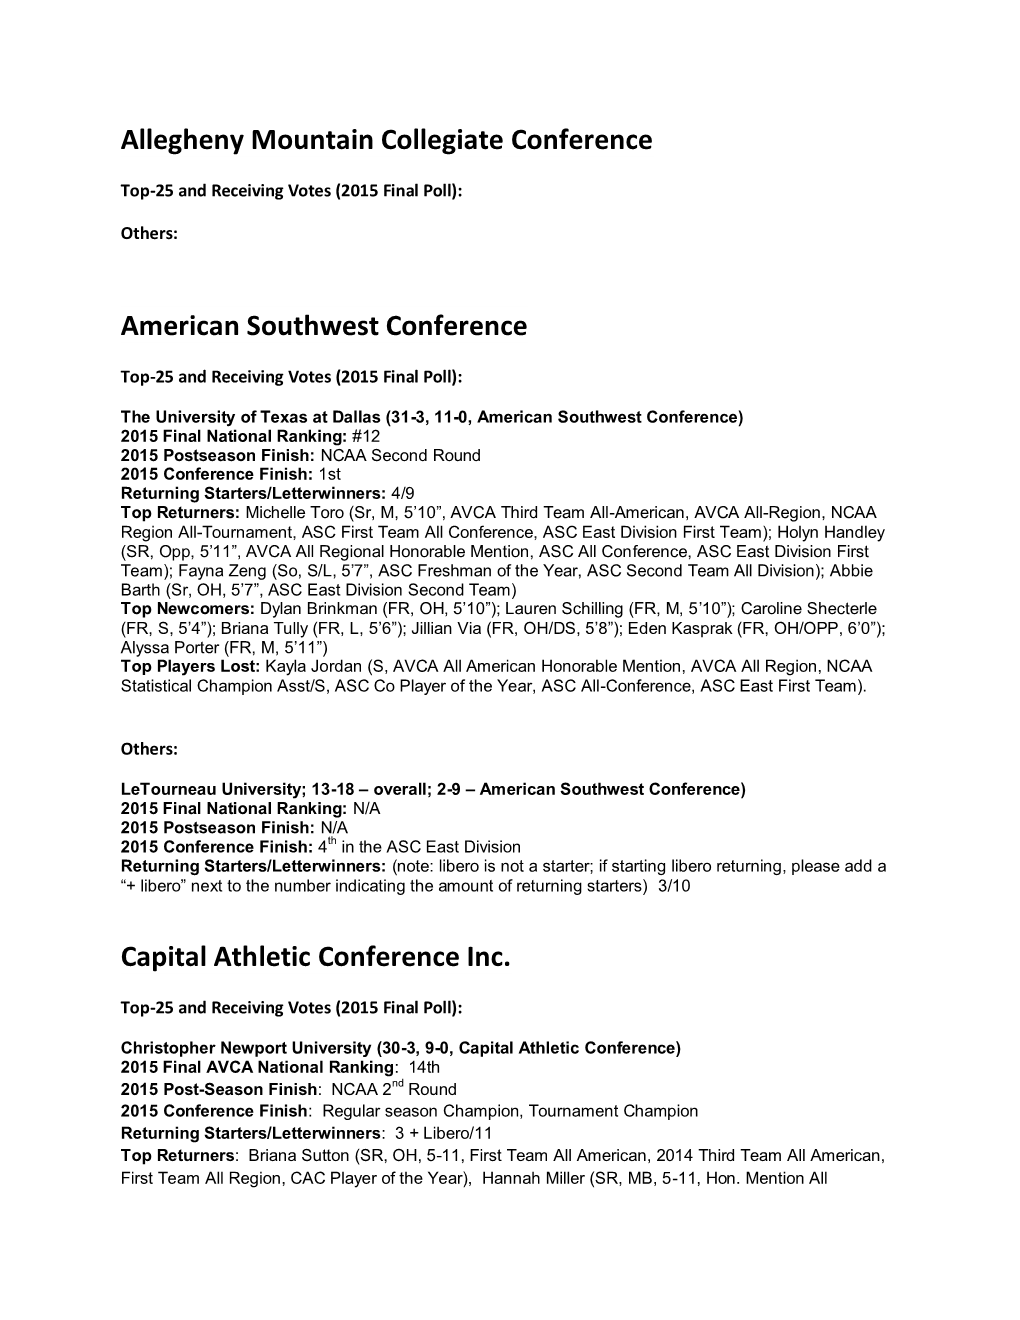 Allegheny Mountain Collegiate Conference American Southwest